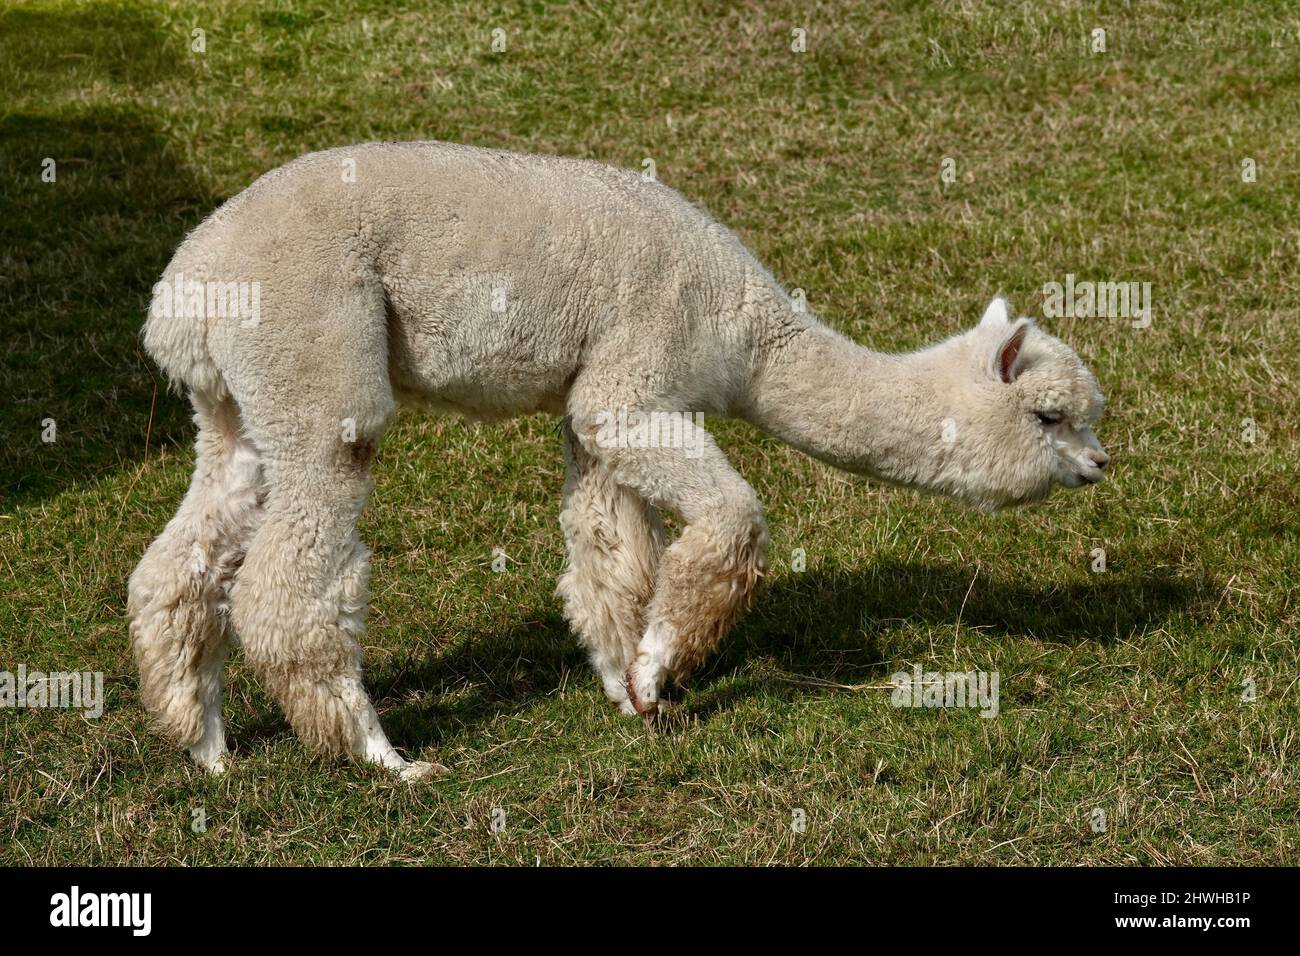 Cute adult llama alpaca standing on green grass and is about to eat grass. Stock Photo